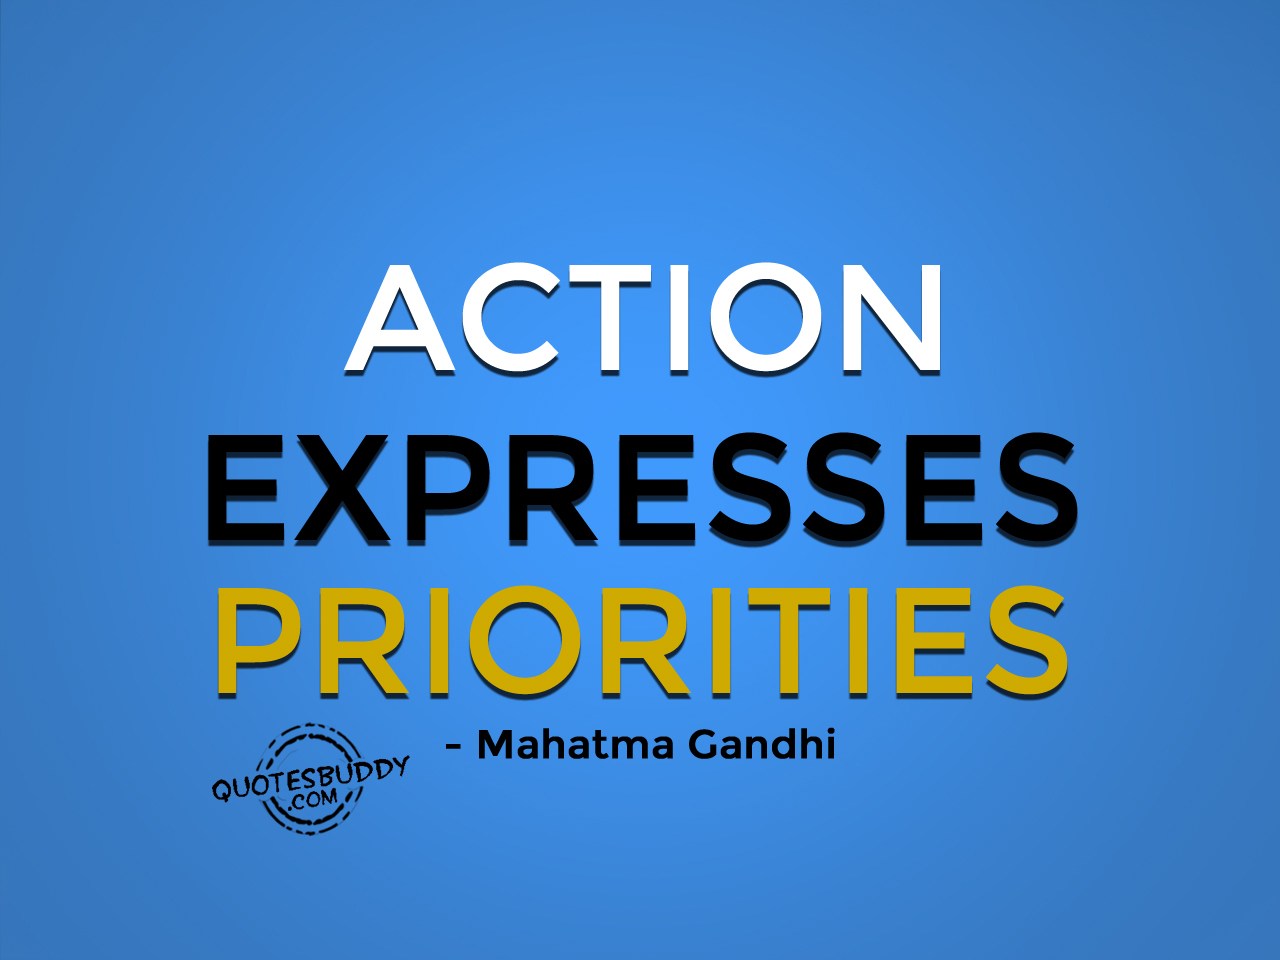 Action expresses priorities (13)